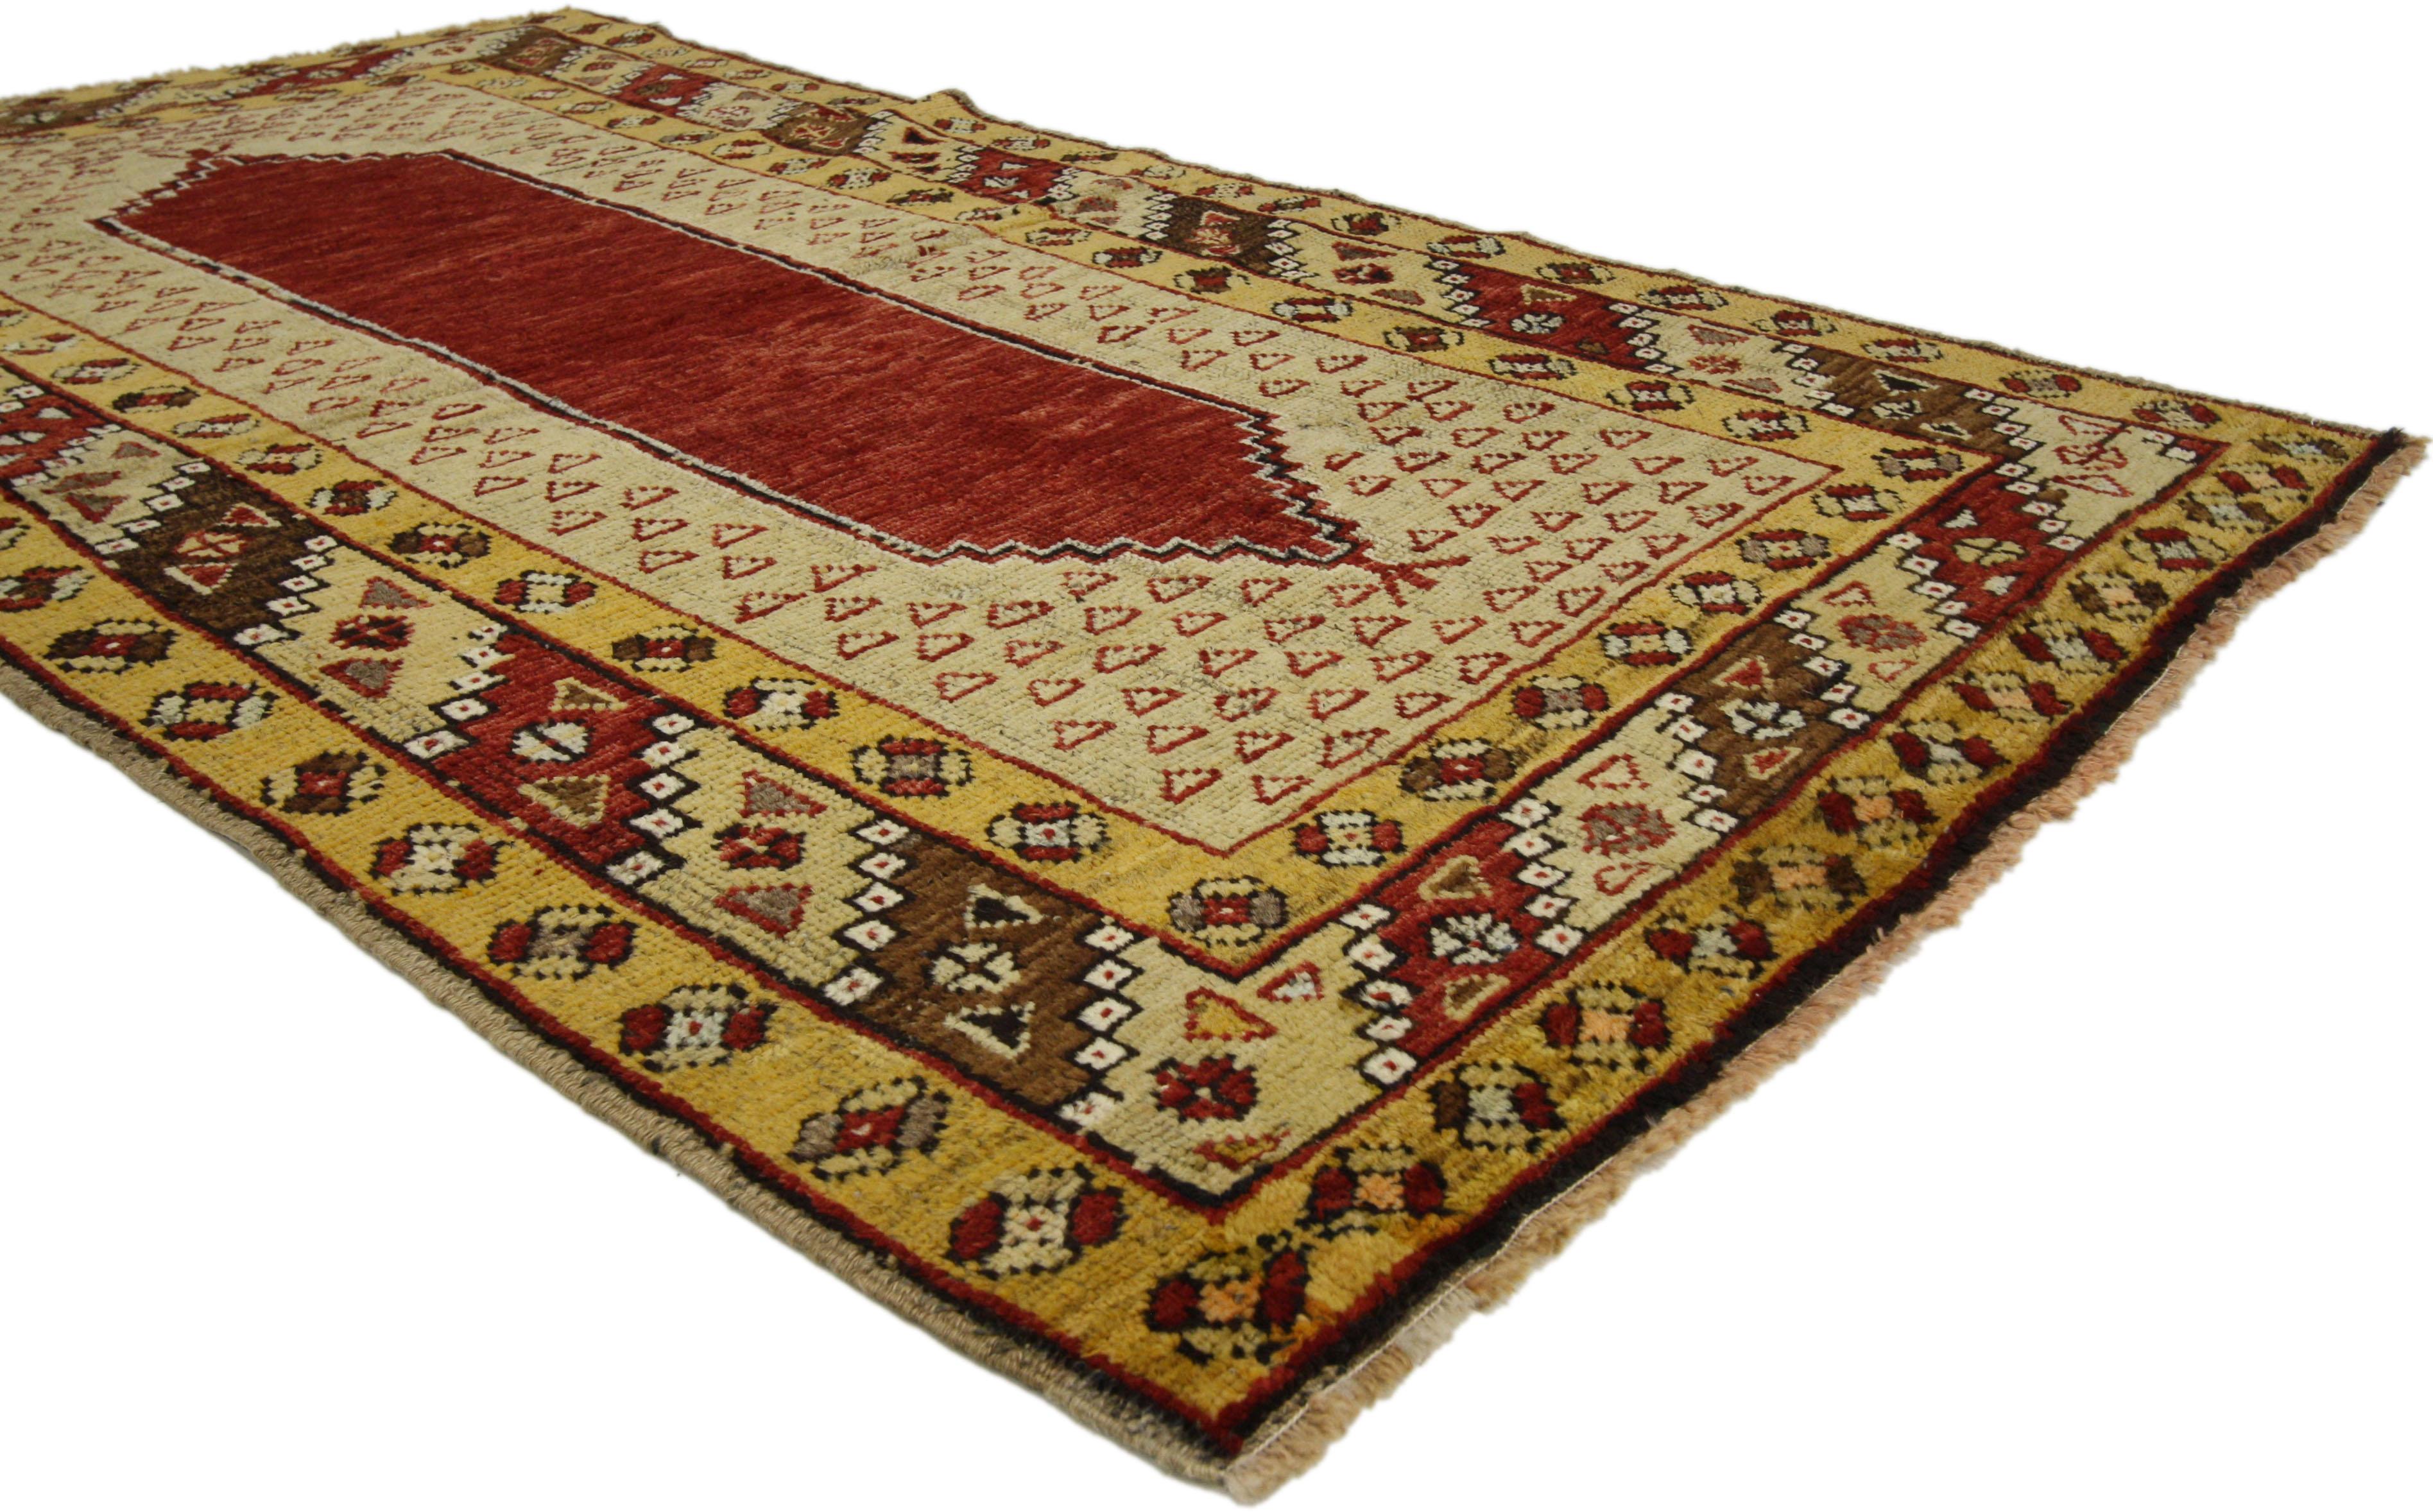 50313, Vintage Turkish Oushak Accent Rug with Jacobean Style 03'04 x 05'08. With its striking appeal and saturated red color palette, this hand-knotted wool vintage Turkish Oushak rug appears like a sumptuous Italian velvet, recalling the rich and